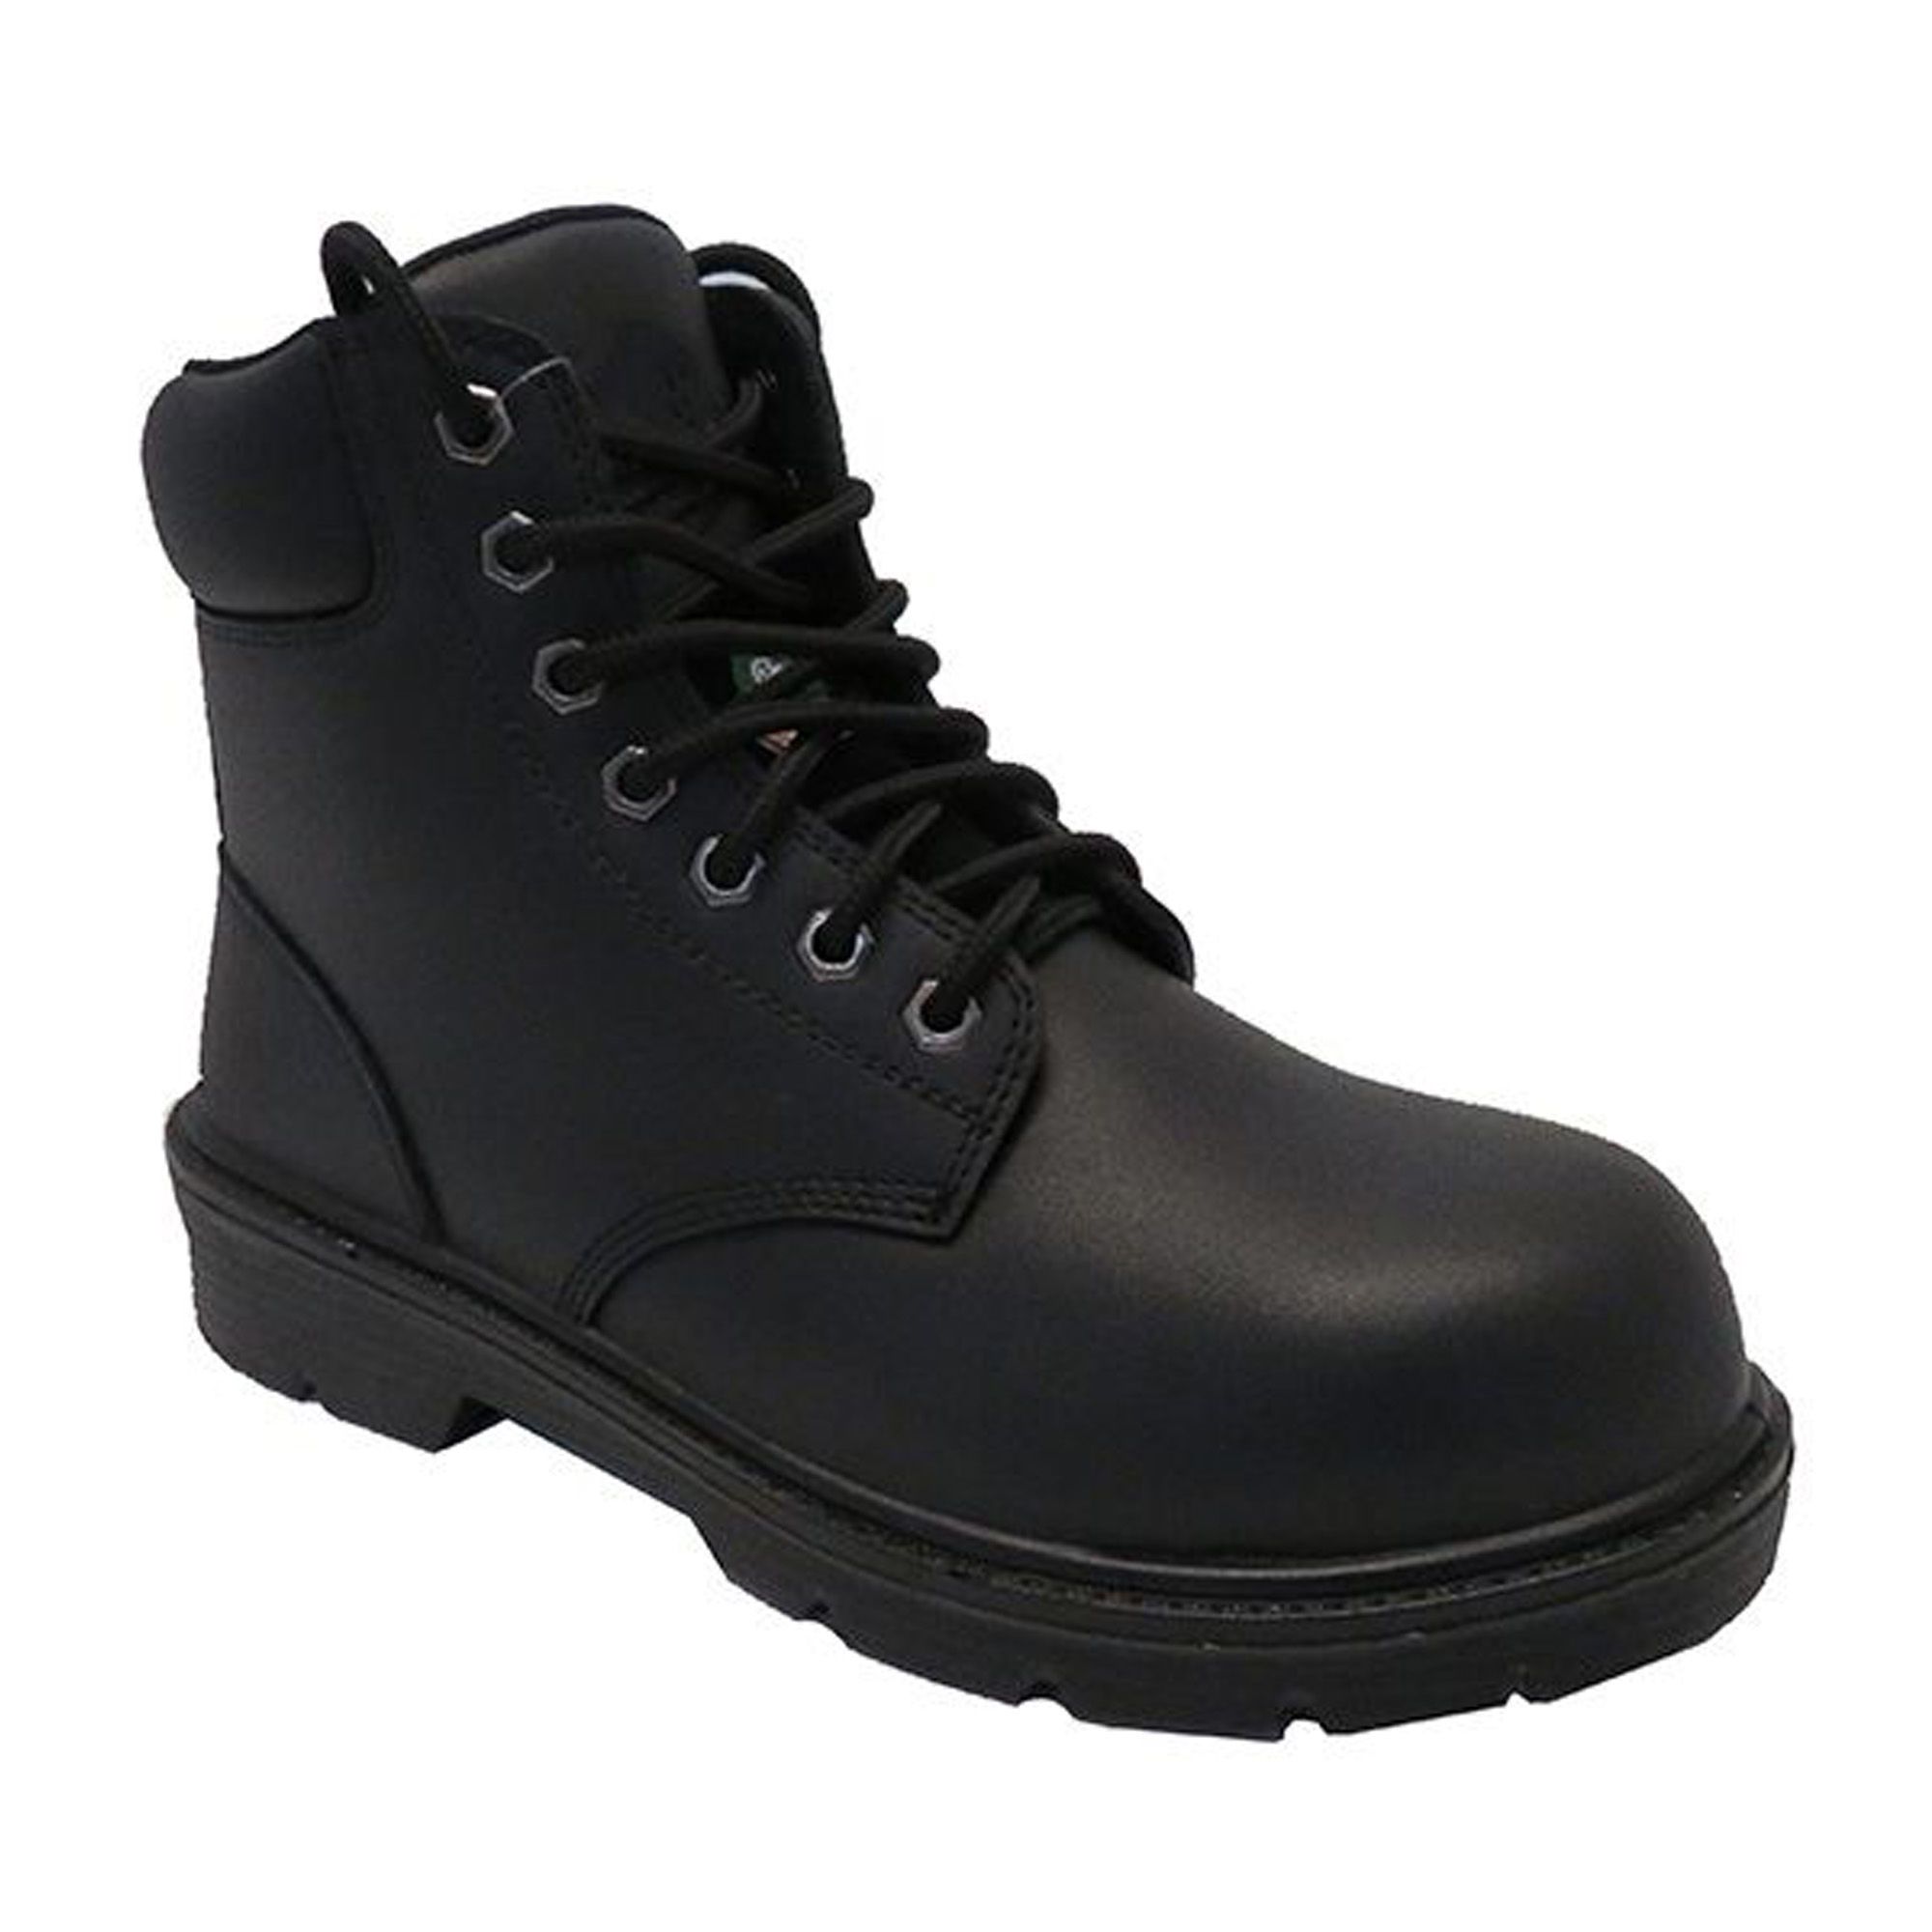 C.S.A. approved workboot from PHOENIX | BMR